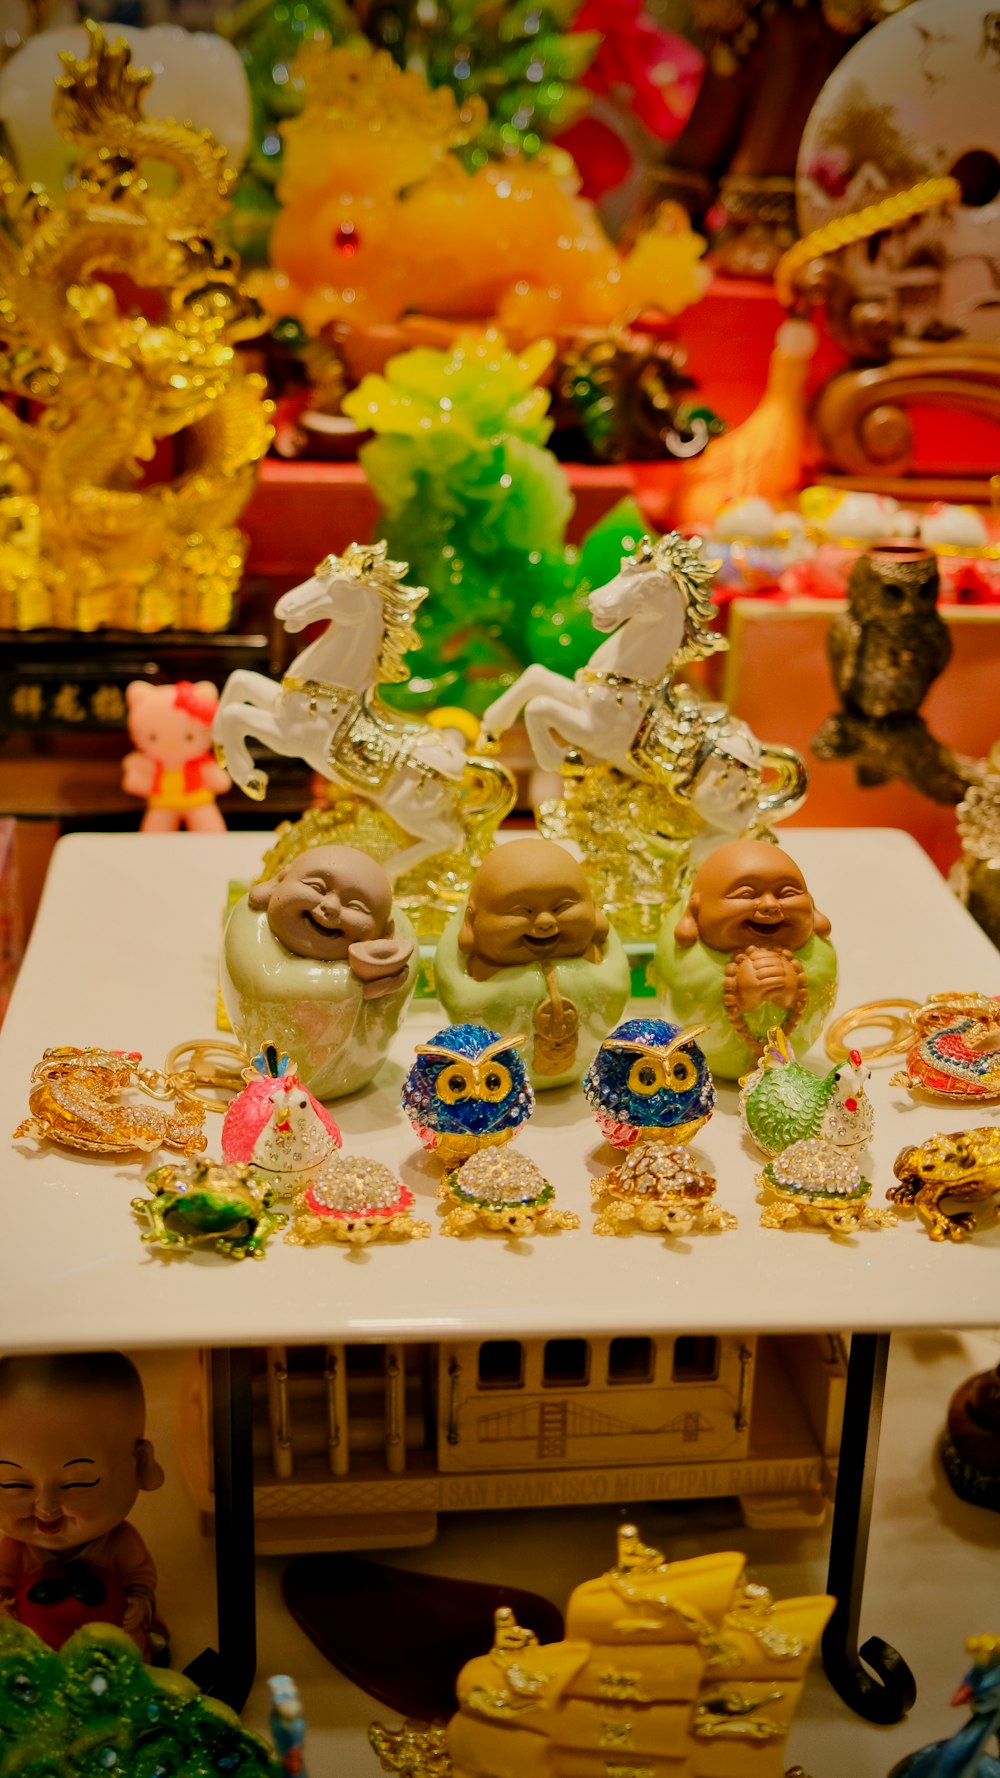 a display of figurines